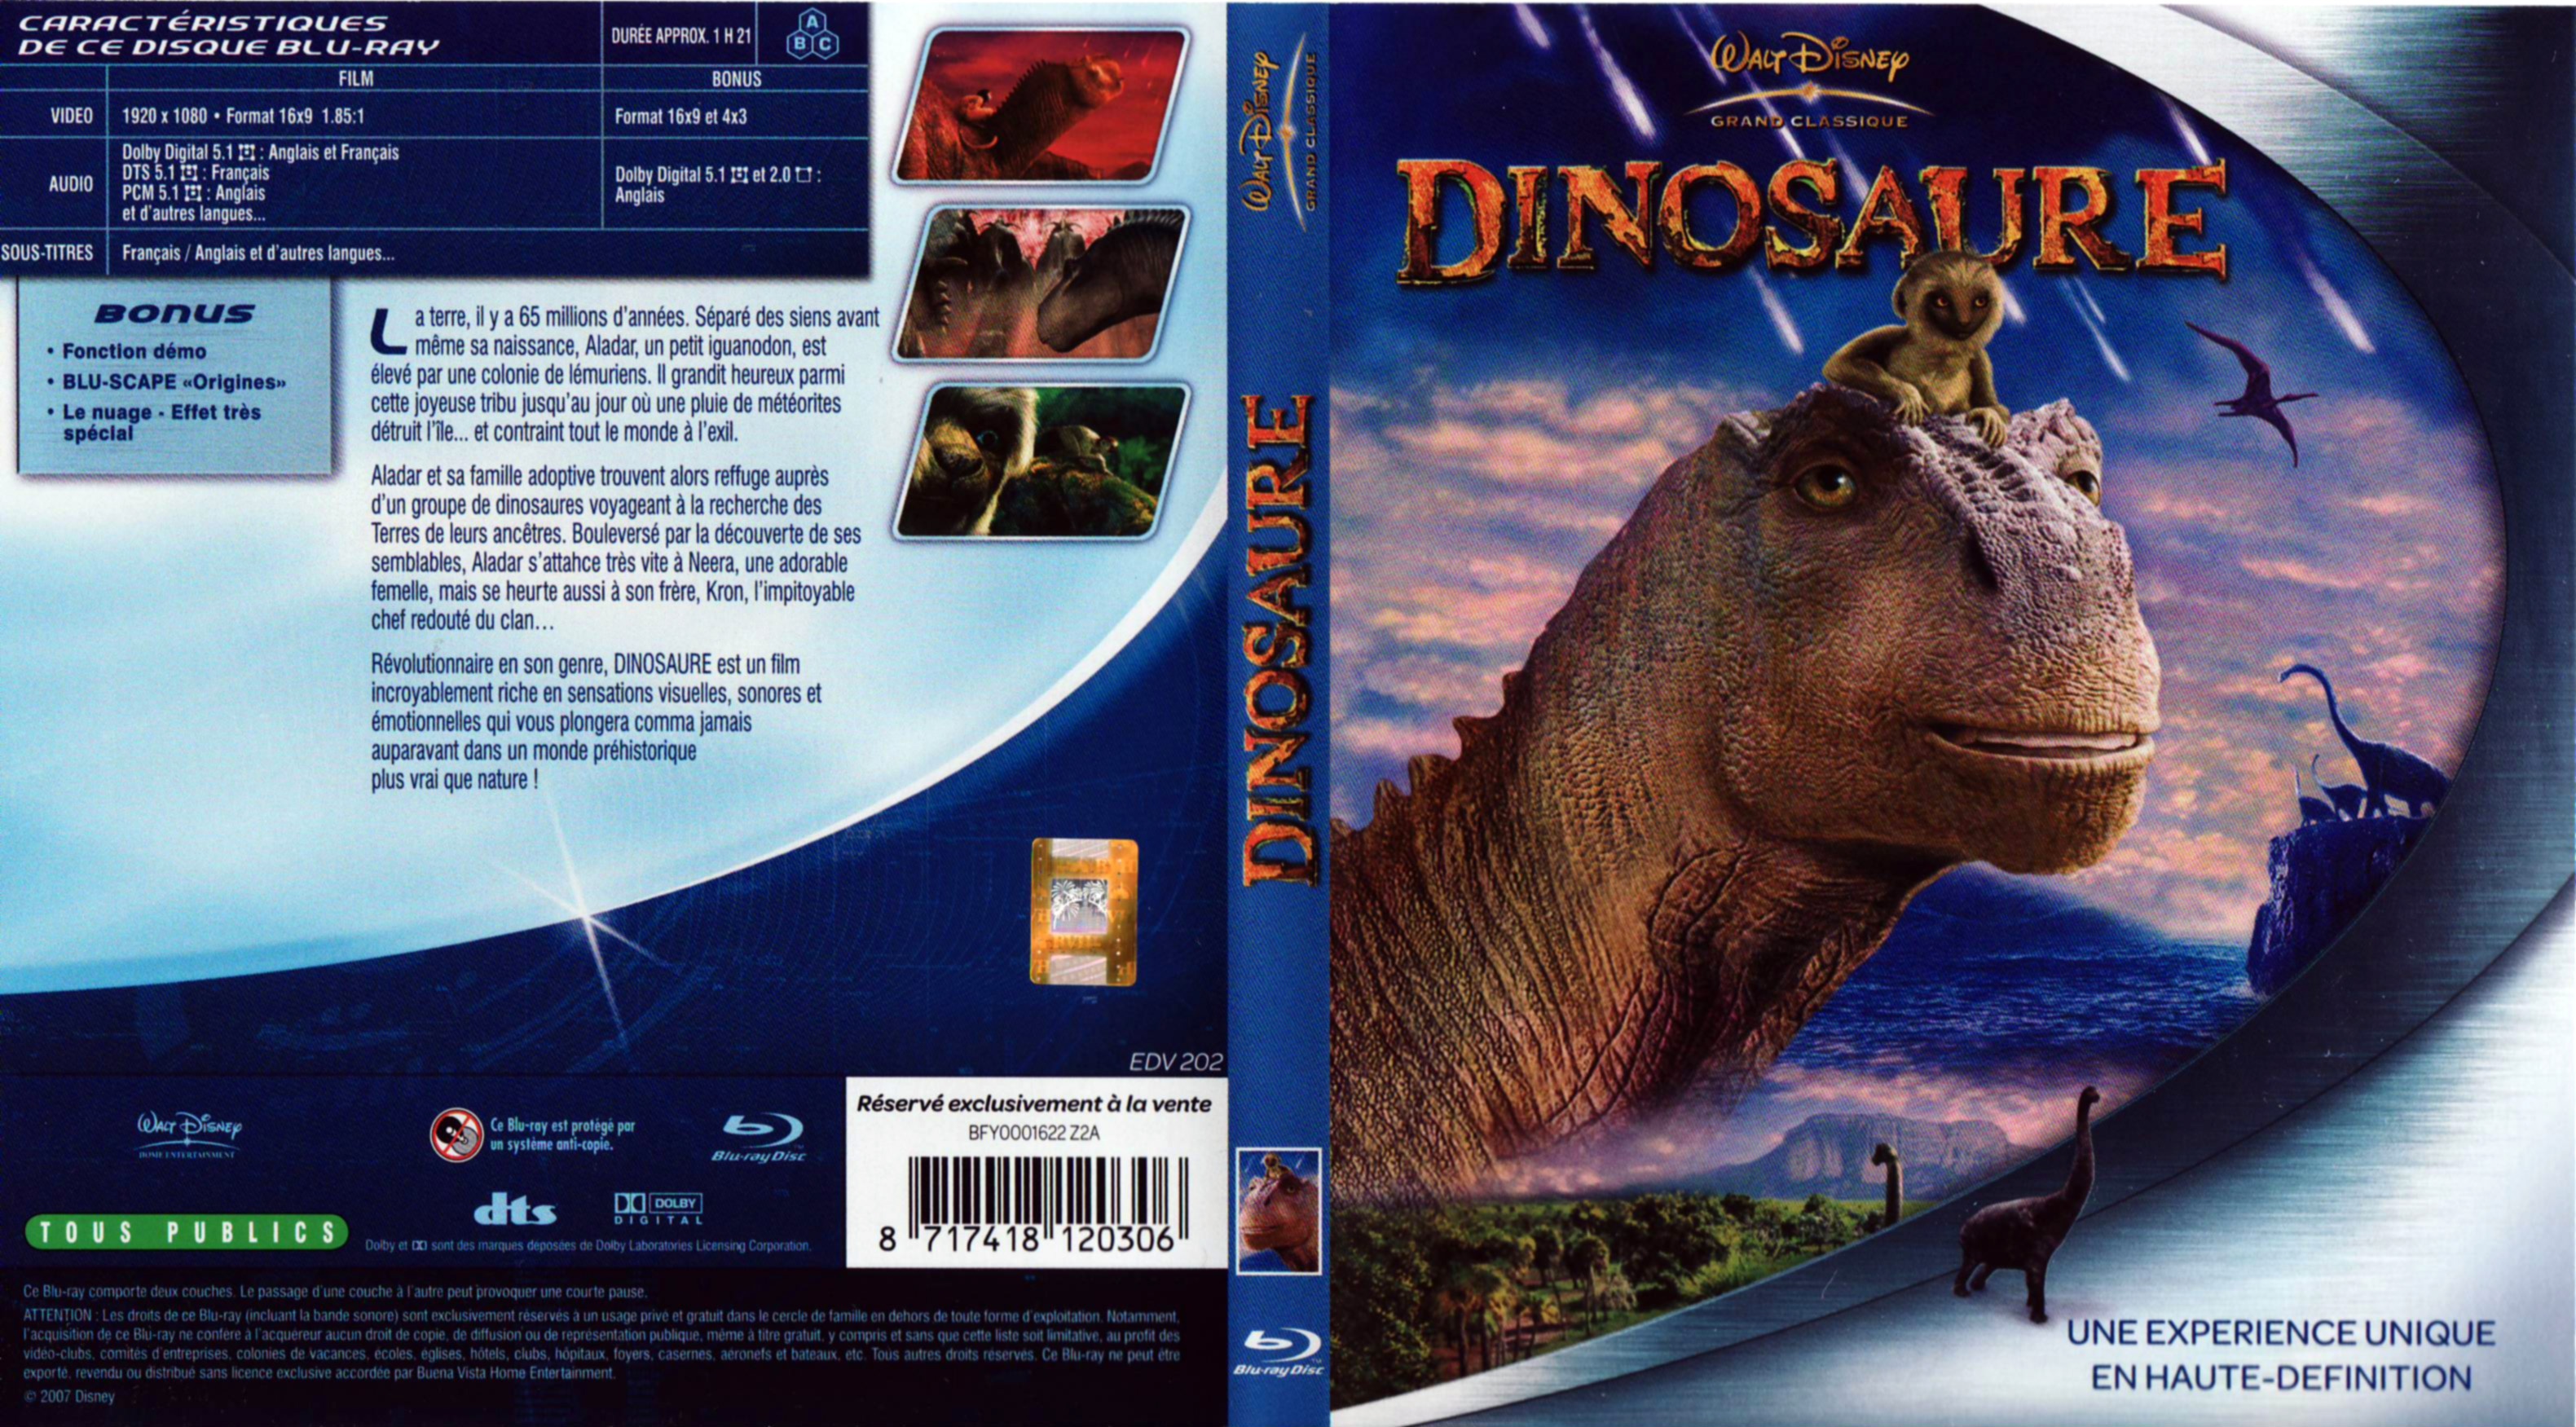 Jaquette DVD Dinosaure (BLU-RAY)